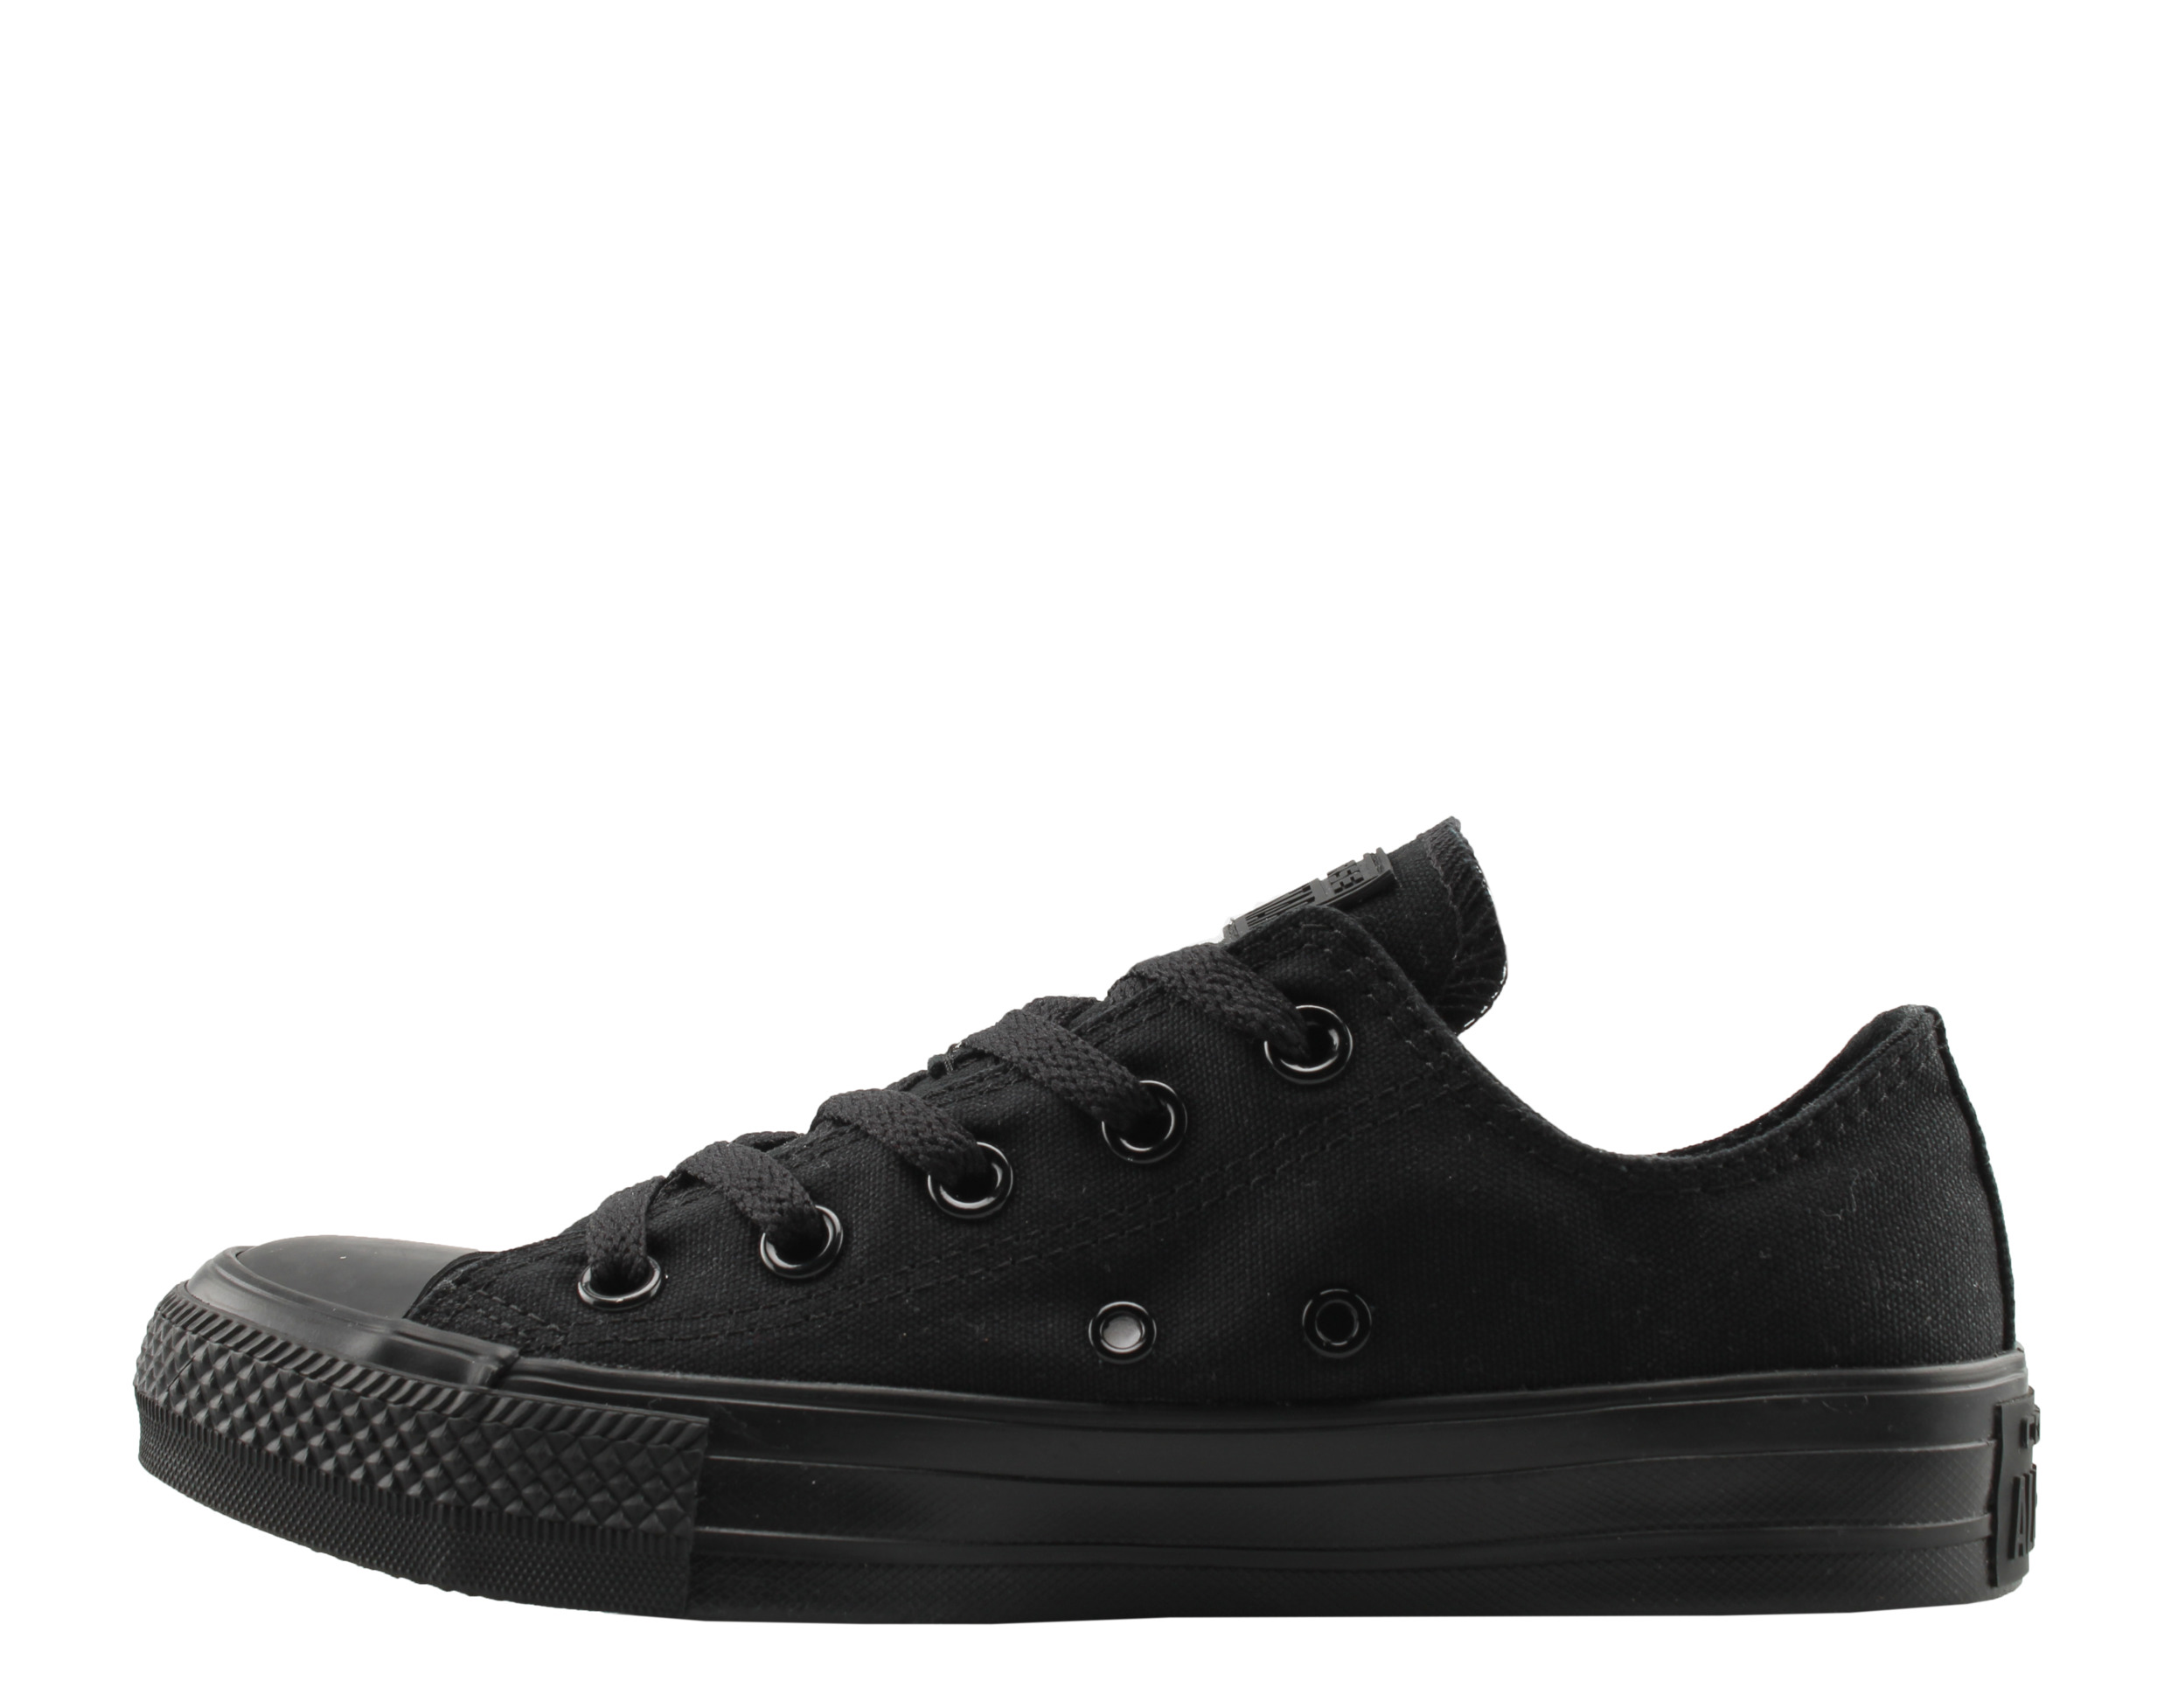 Converse Chuck Taylor All Star Low Sneaker - image 3 of 6